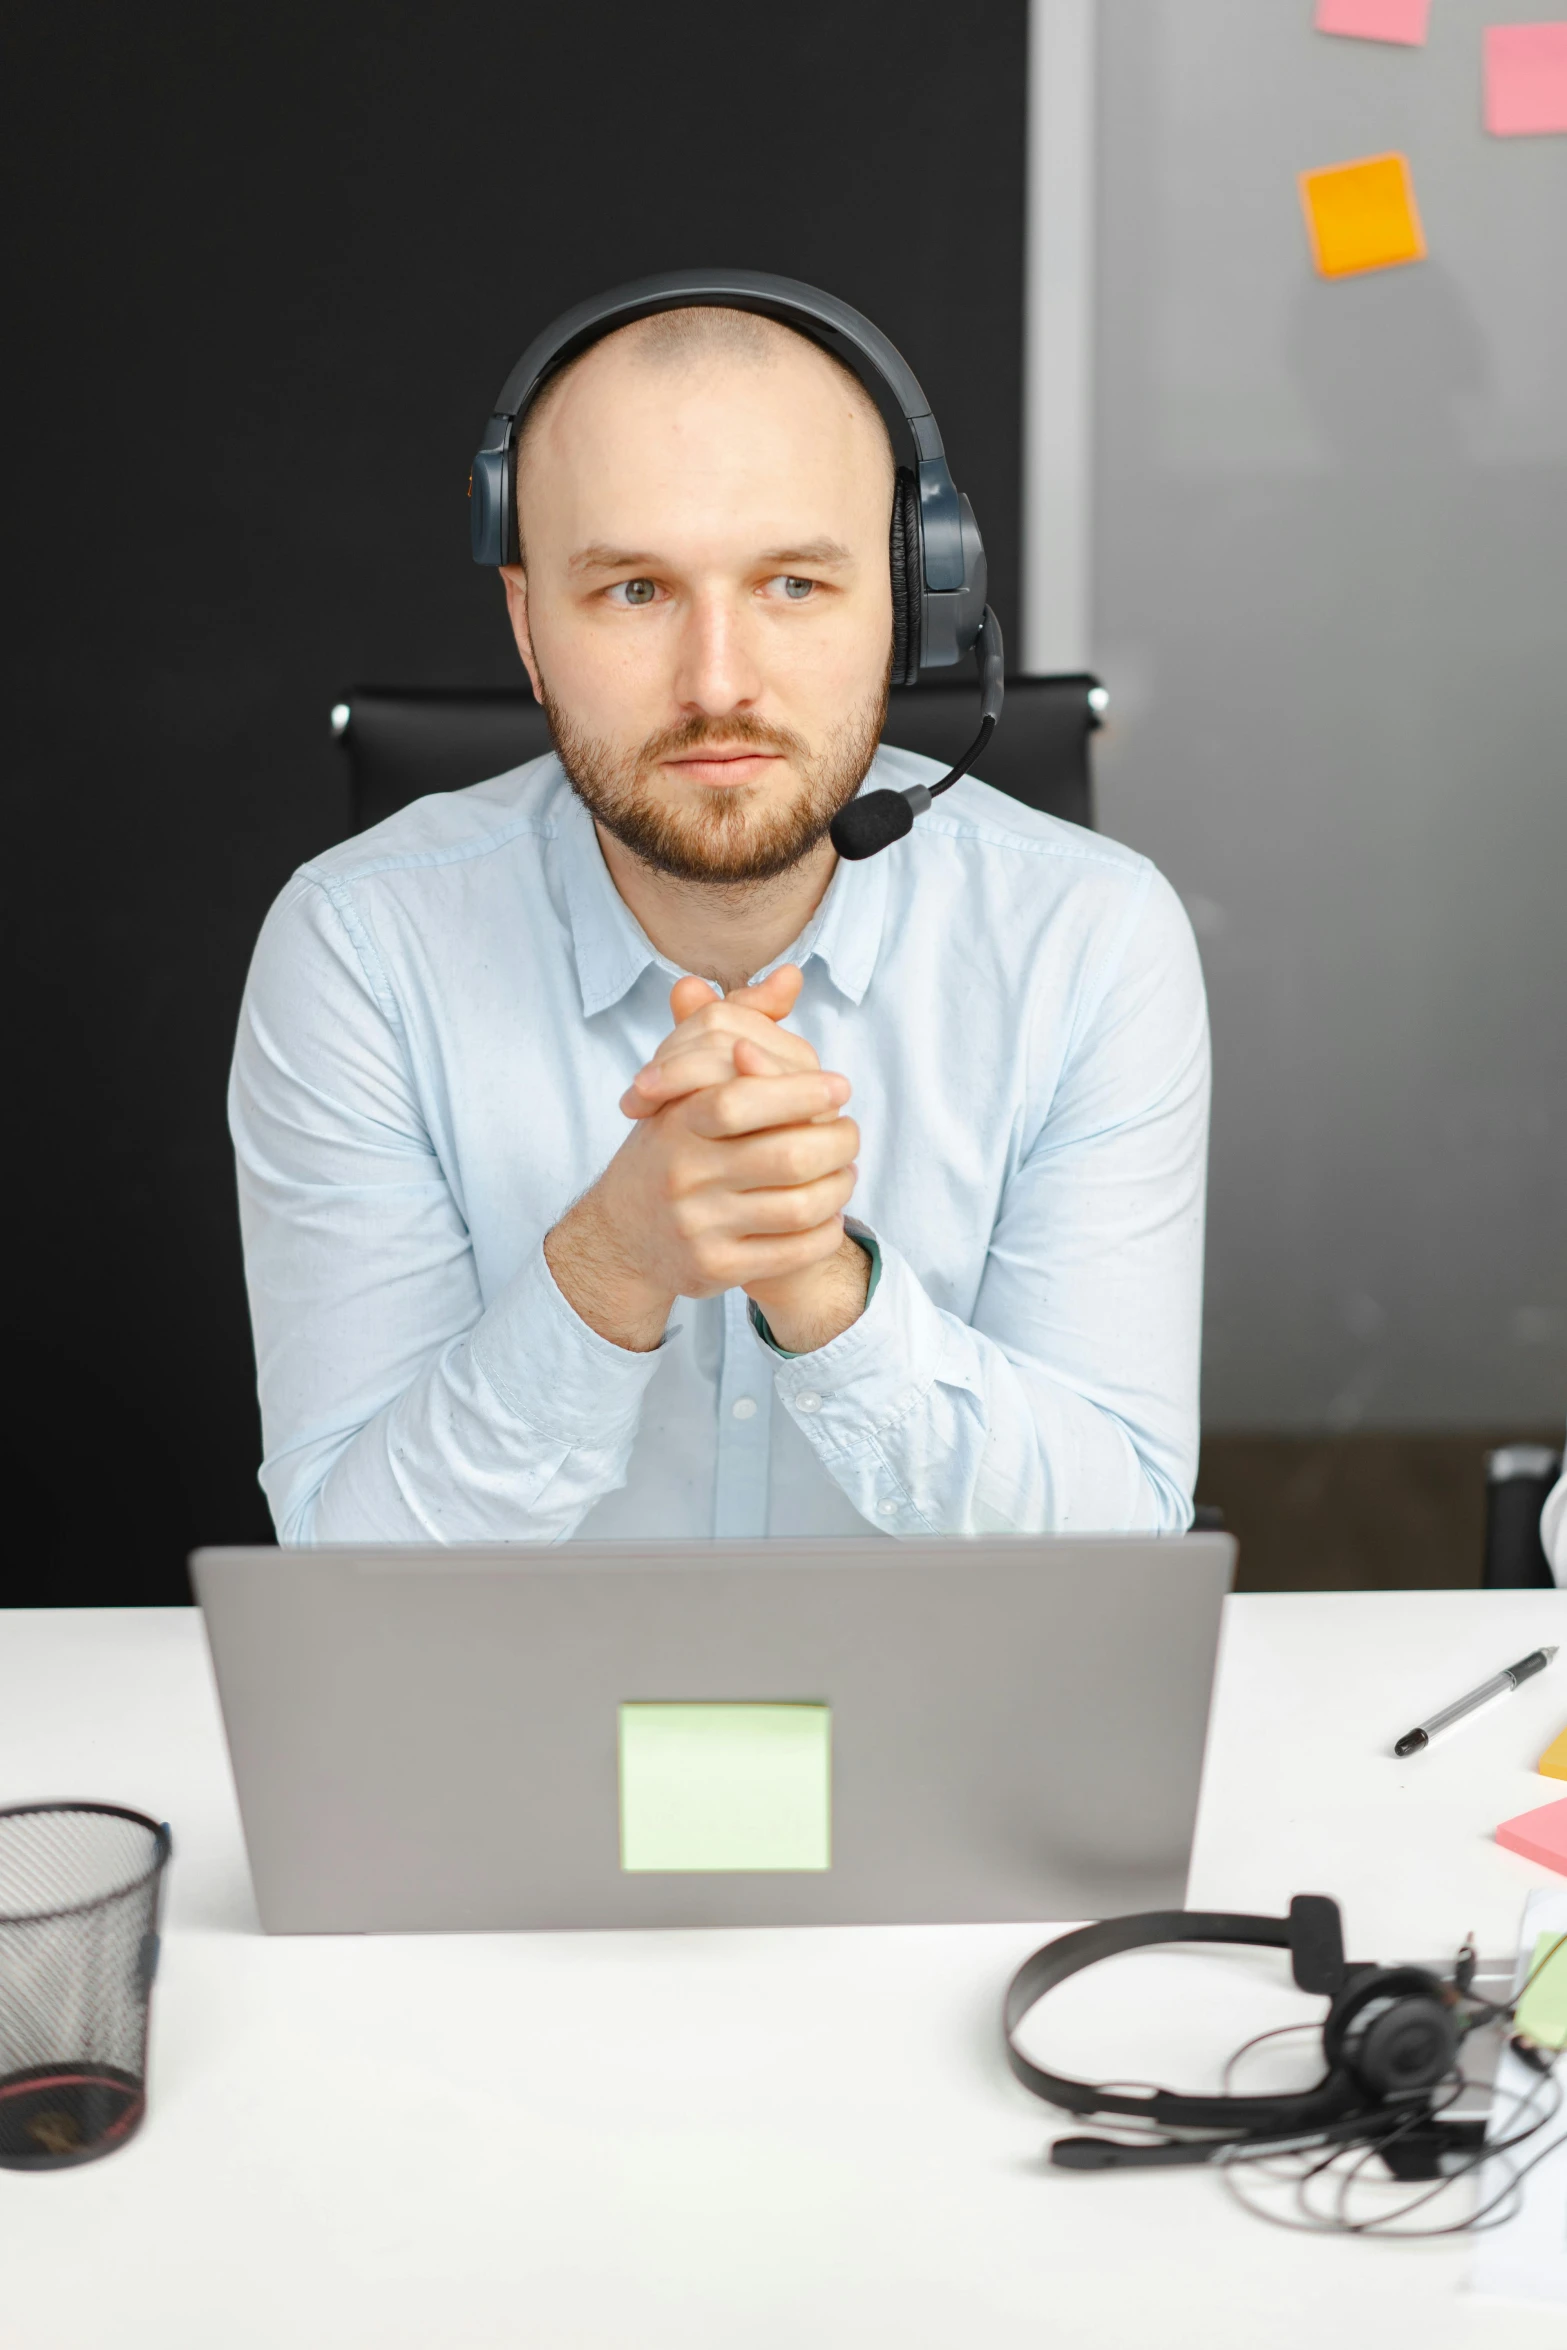 a man sitting at a desk with a laptop and headphones, holding a microphone, it specialist, thumbnail, centered in image